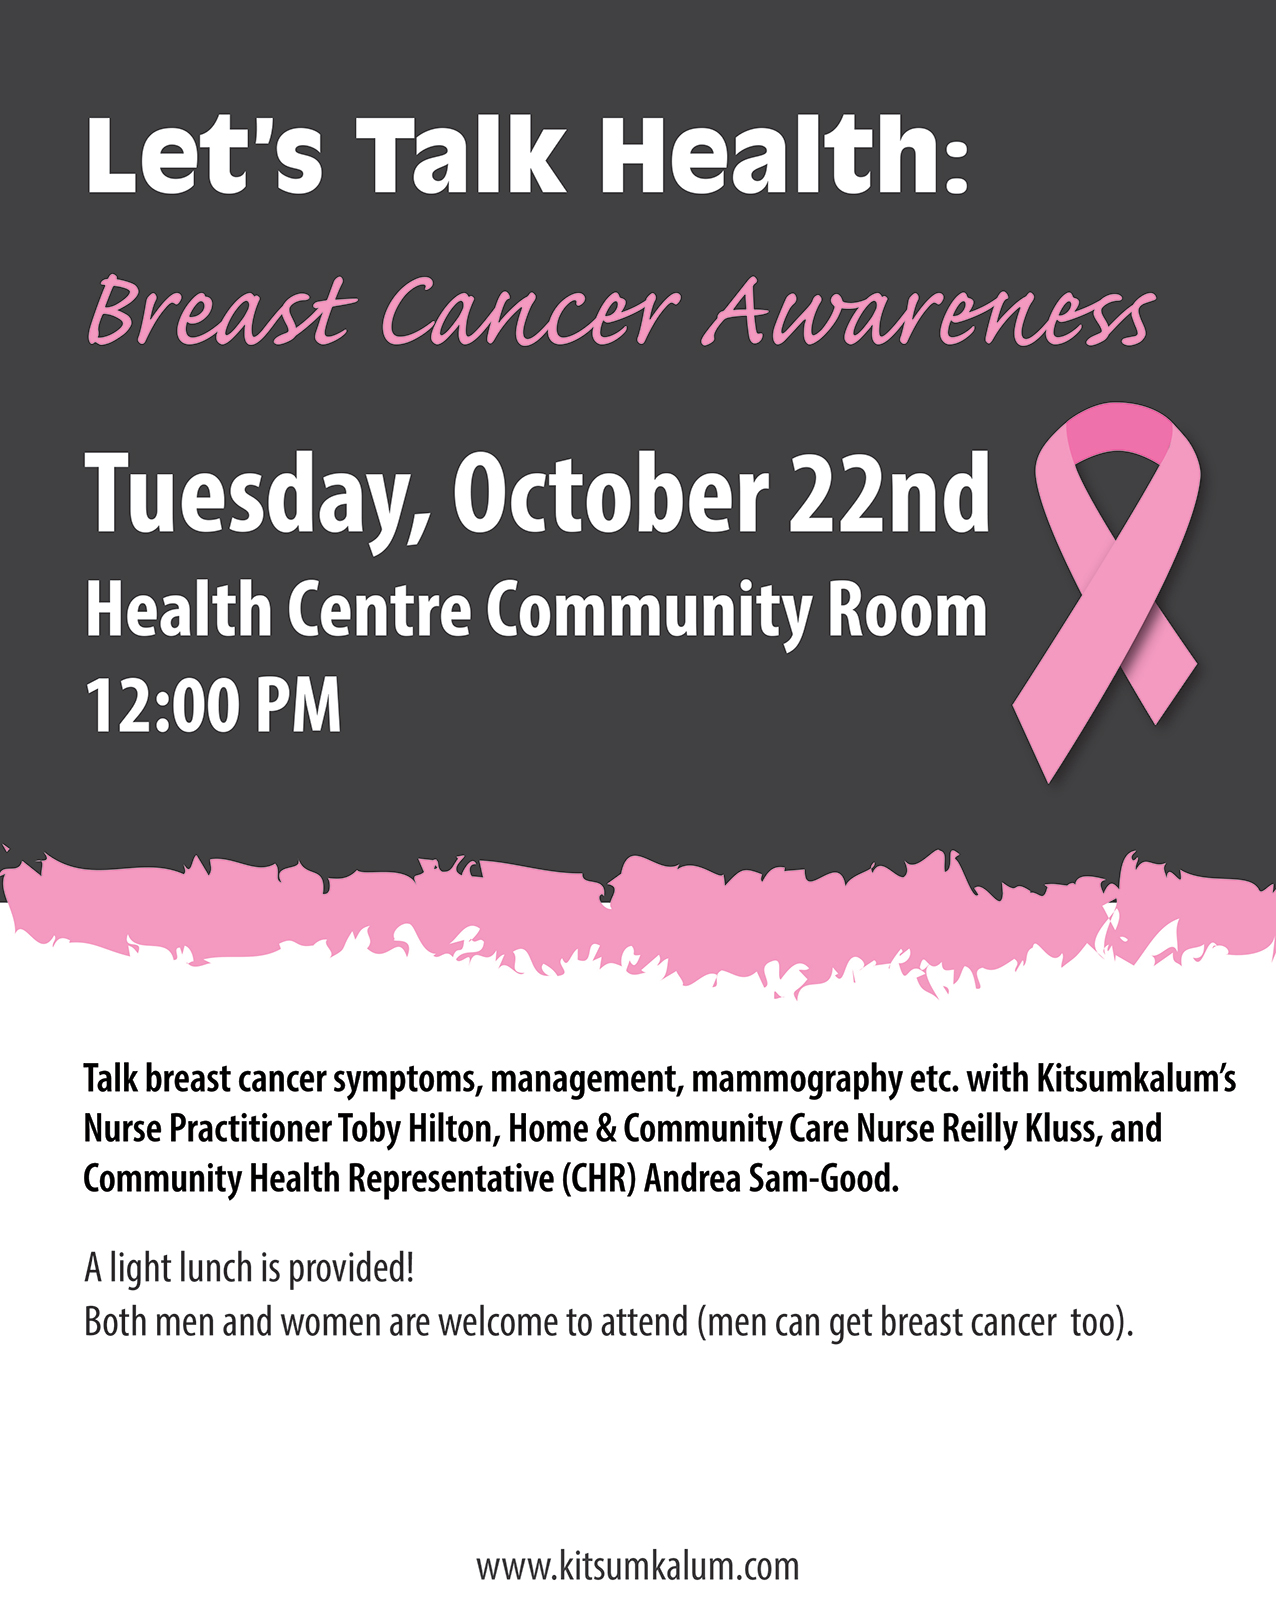 Let’s Talk Health: Breast Cancer Awareness